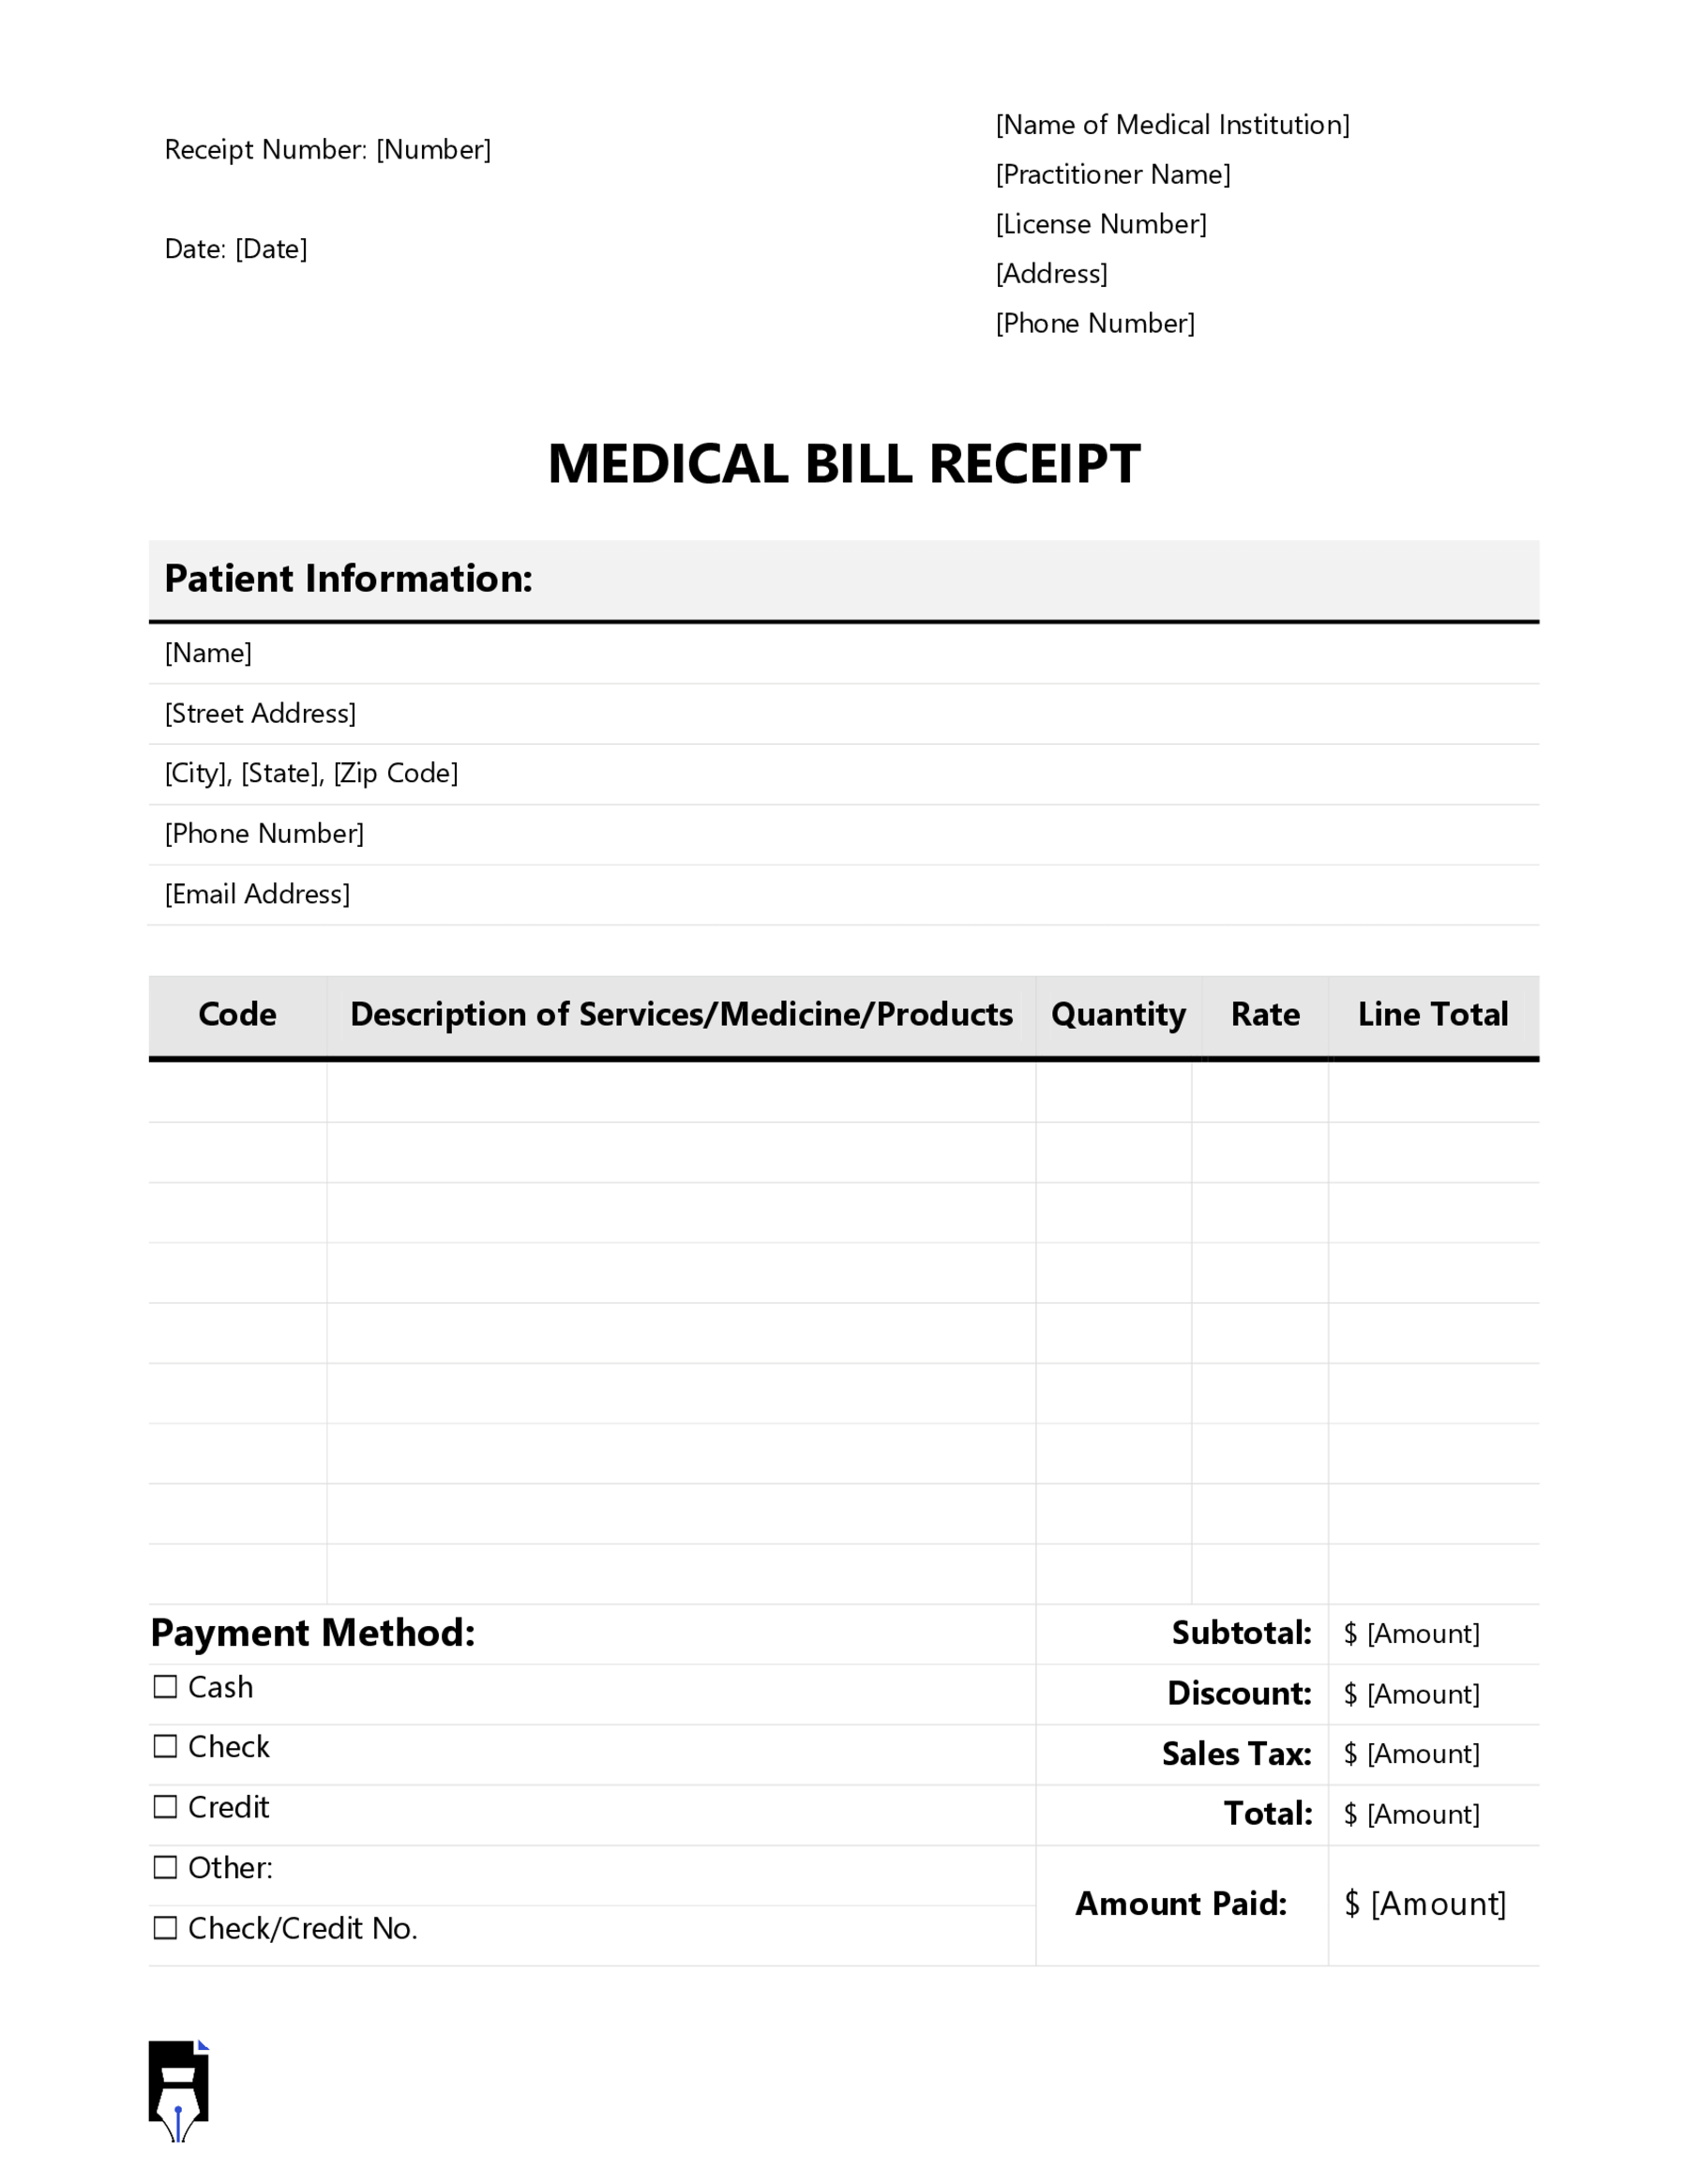 ditable Medical Bill Receipt Template in Word